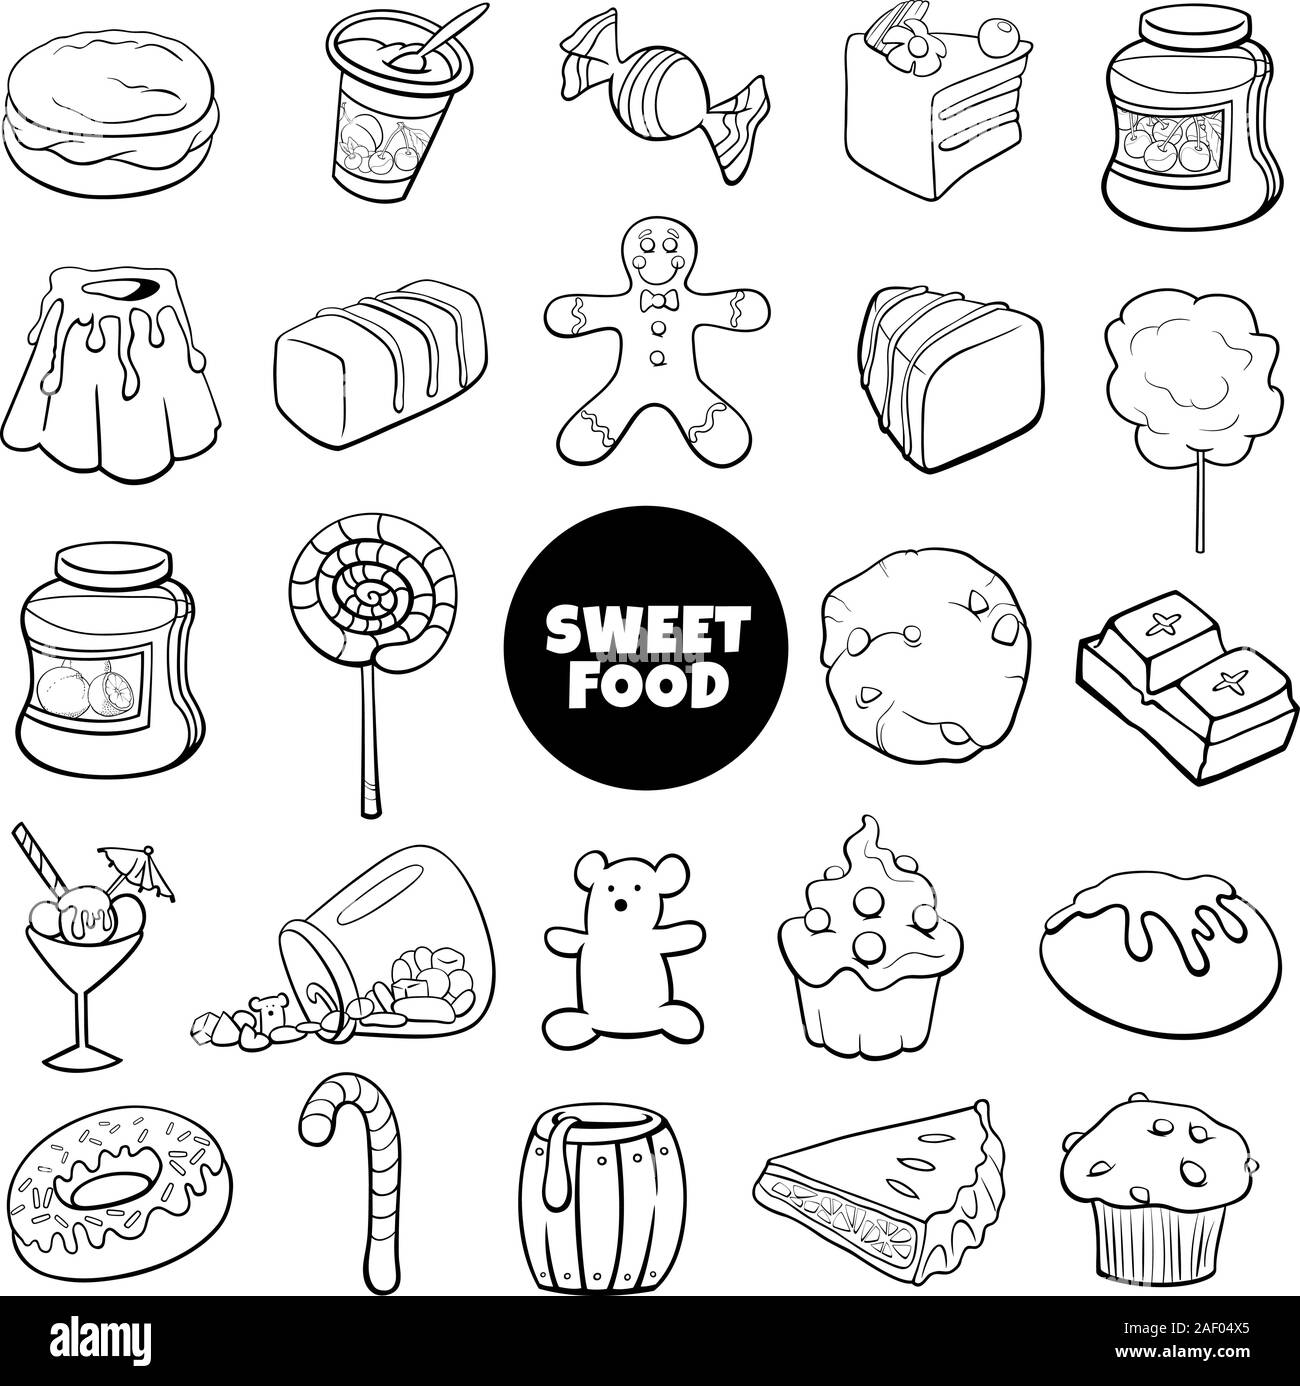 Black and White Cartoon Illustration of Sweet Food Objects Large Set Stock Vector